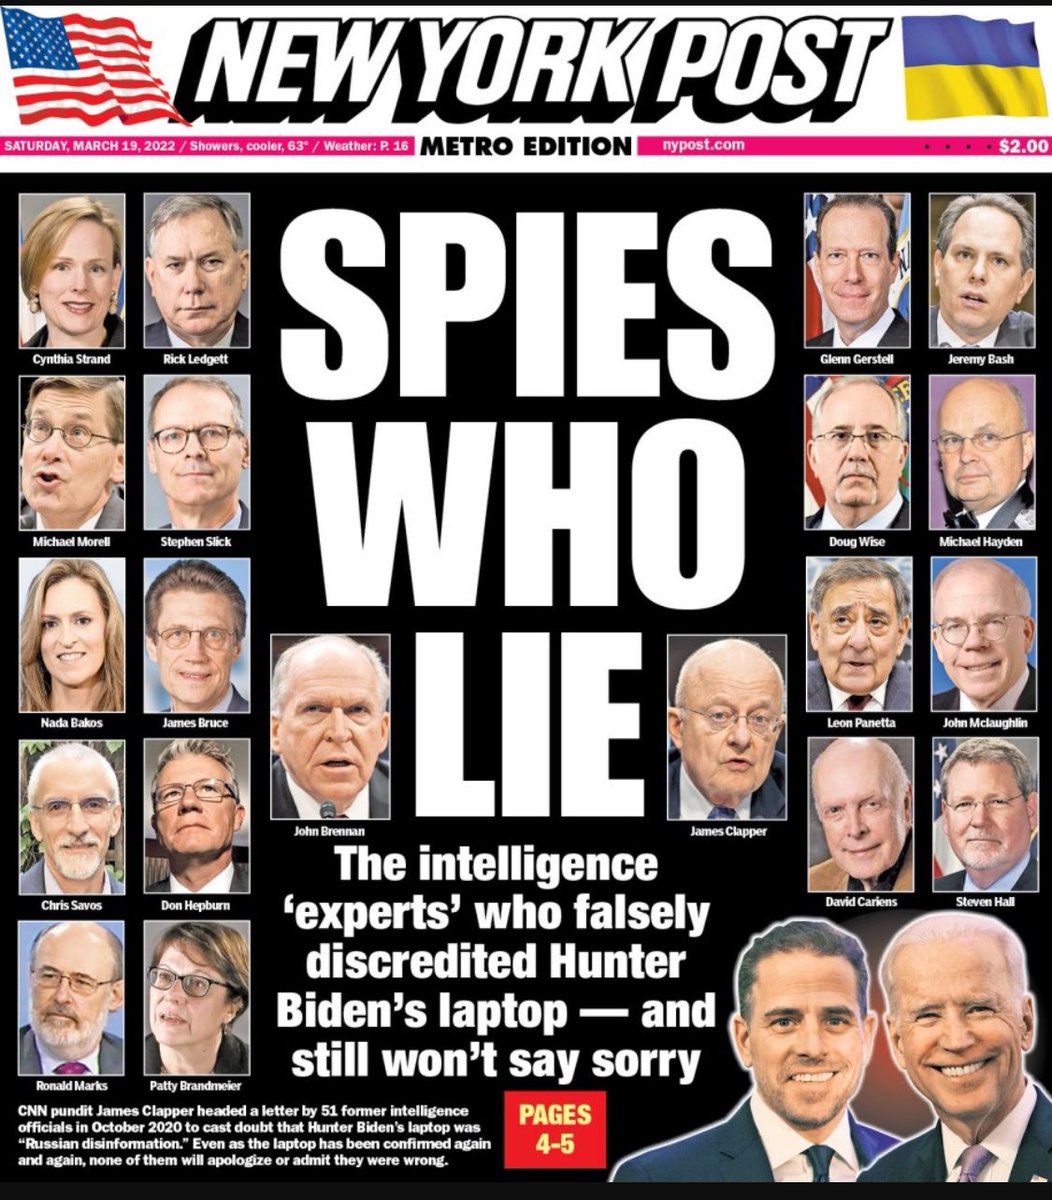 If hush money is election interference… When will the 51 “intelligence” agents and the media — who lied about Hunter Biden’s laptop — be indicted? #HushMoney